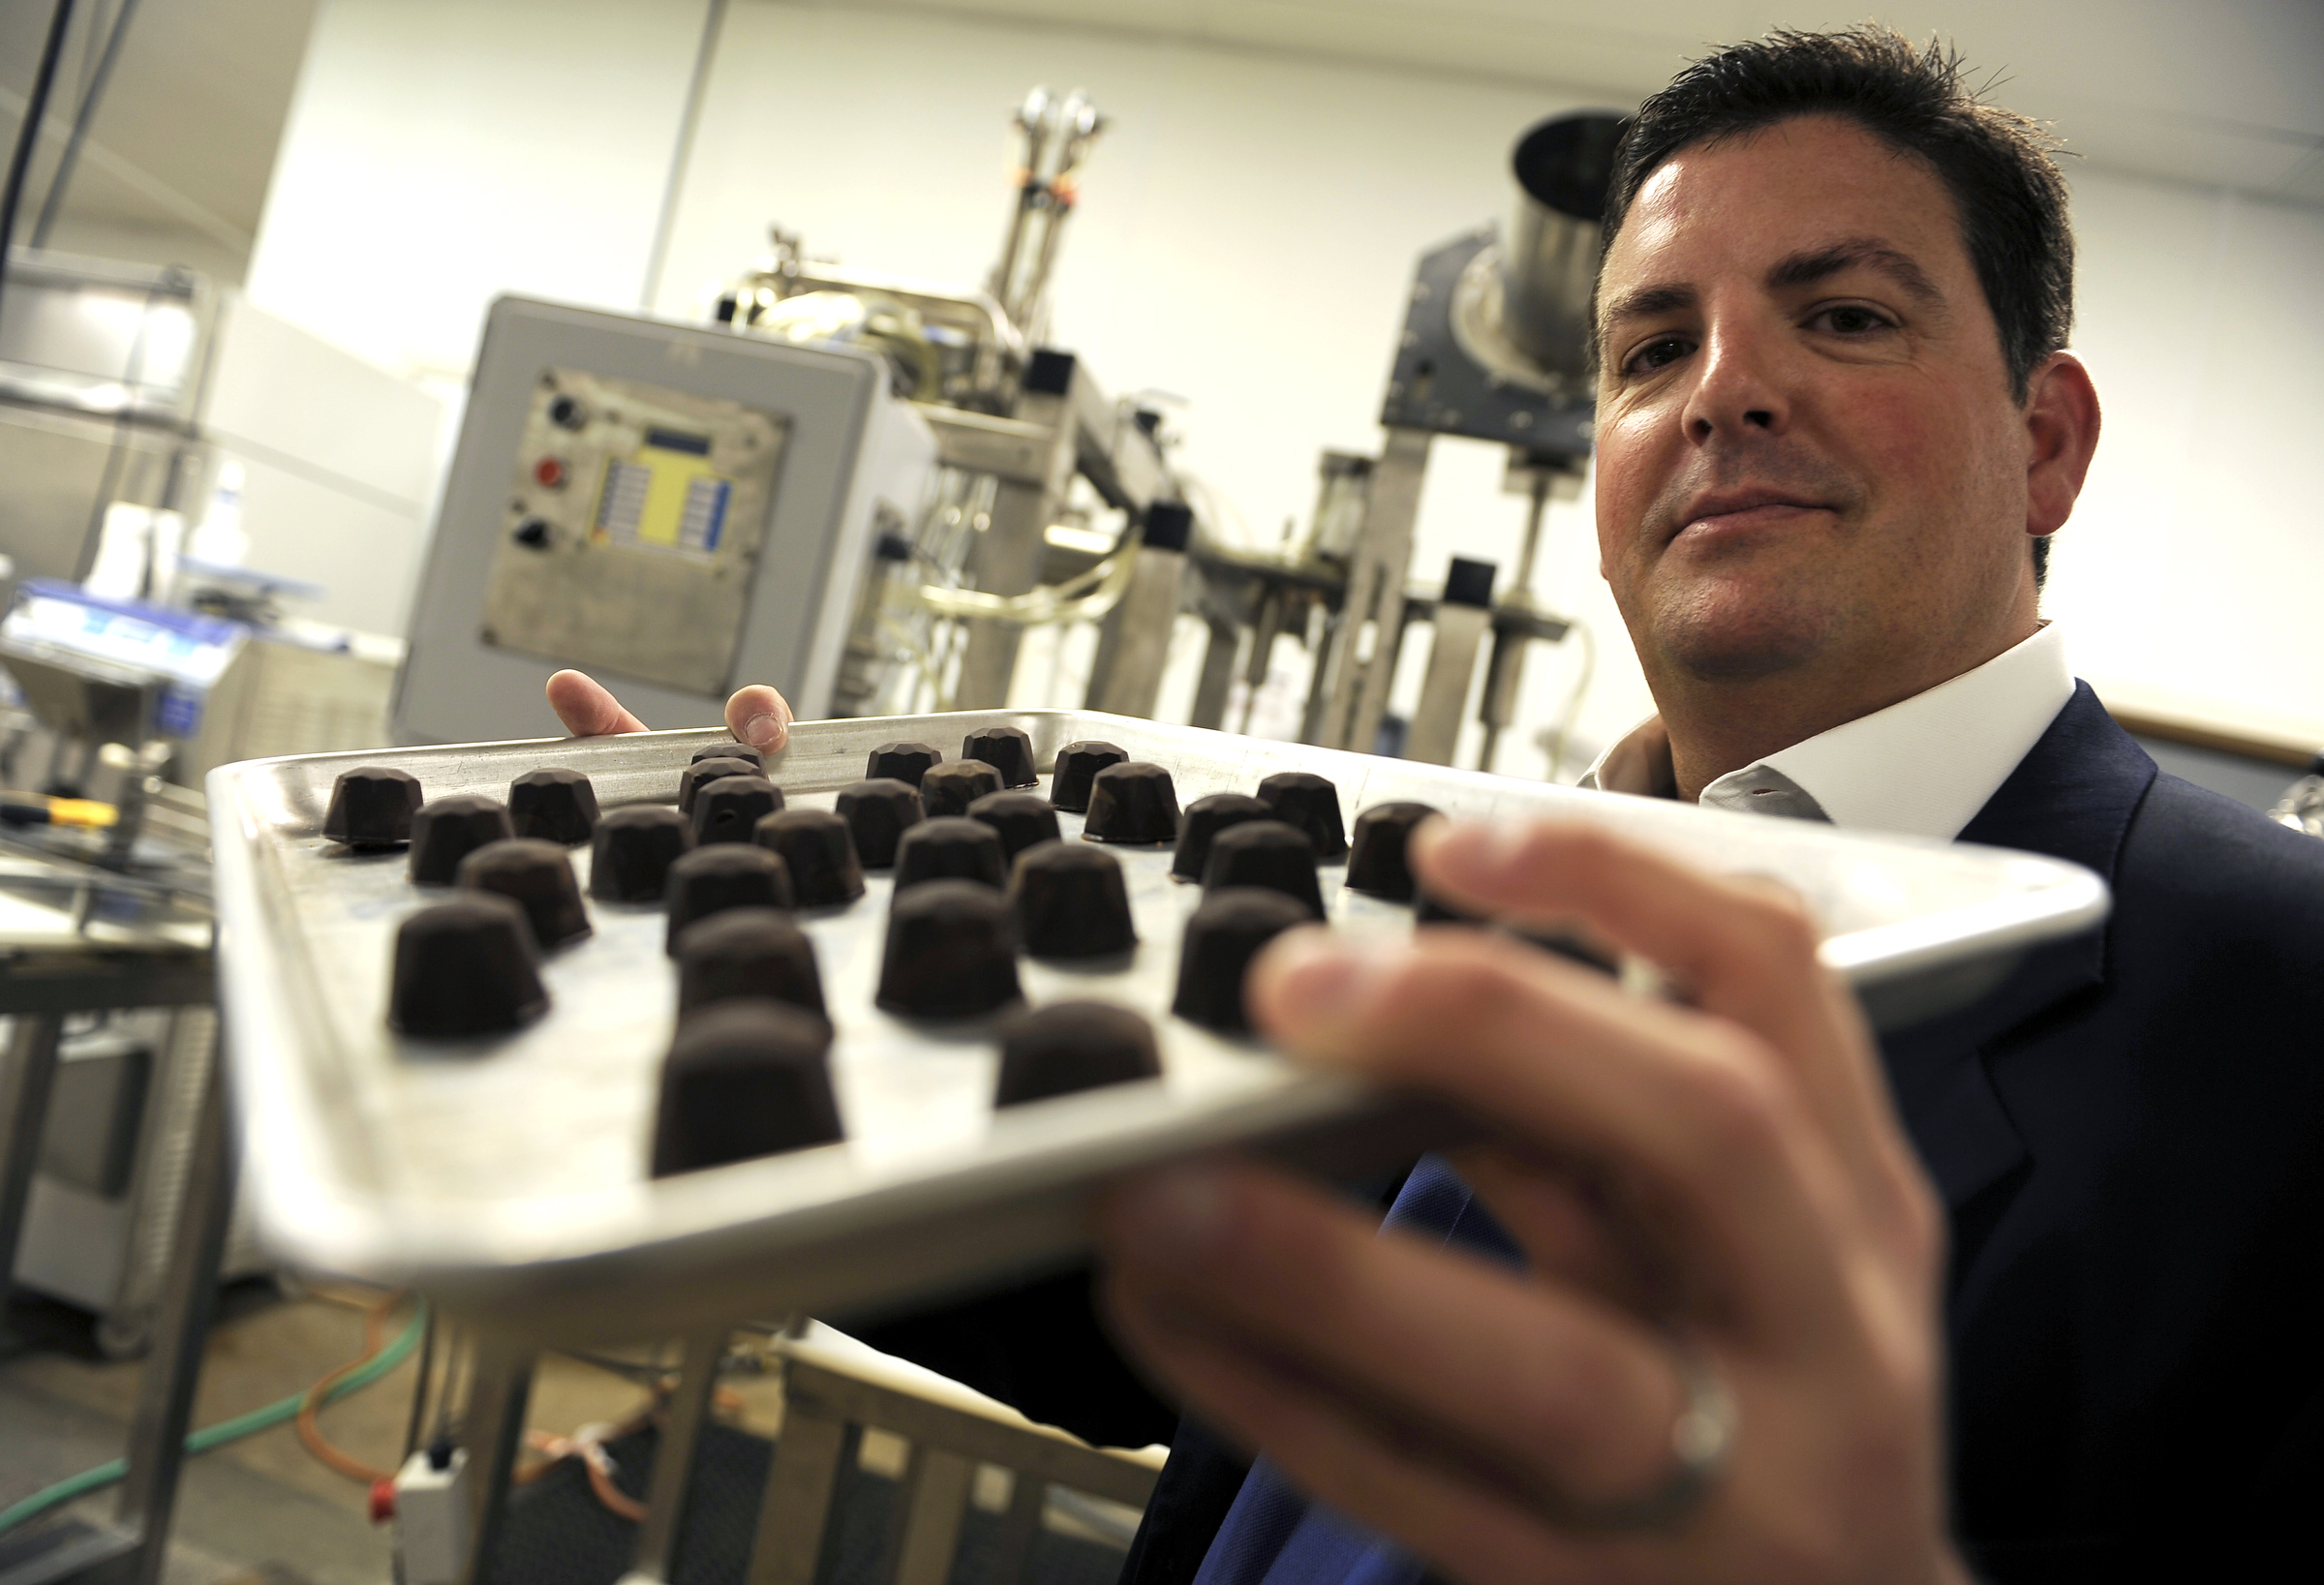 PHOTO: Tripp Keber, CEO of Dixie Elixir, runs the Denver-based medical marijuana company that produces medicated and non-medicated food items, beverages and salves, May 24, 2012.